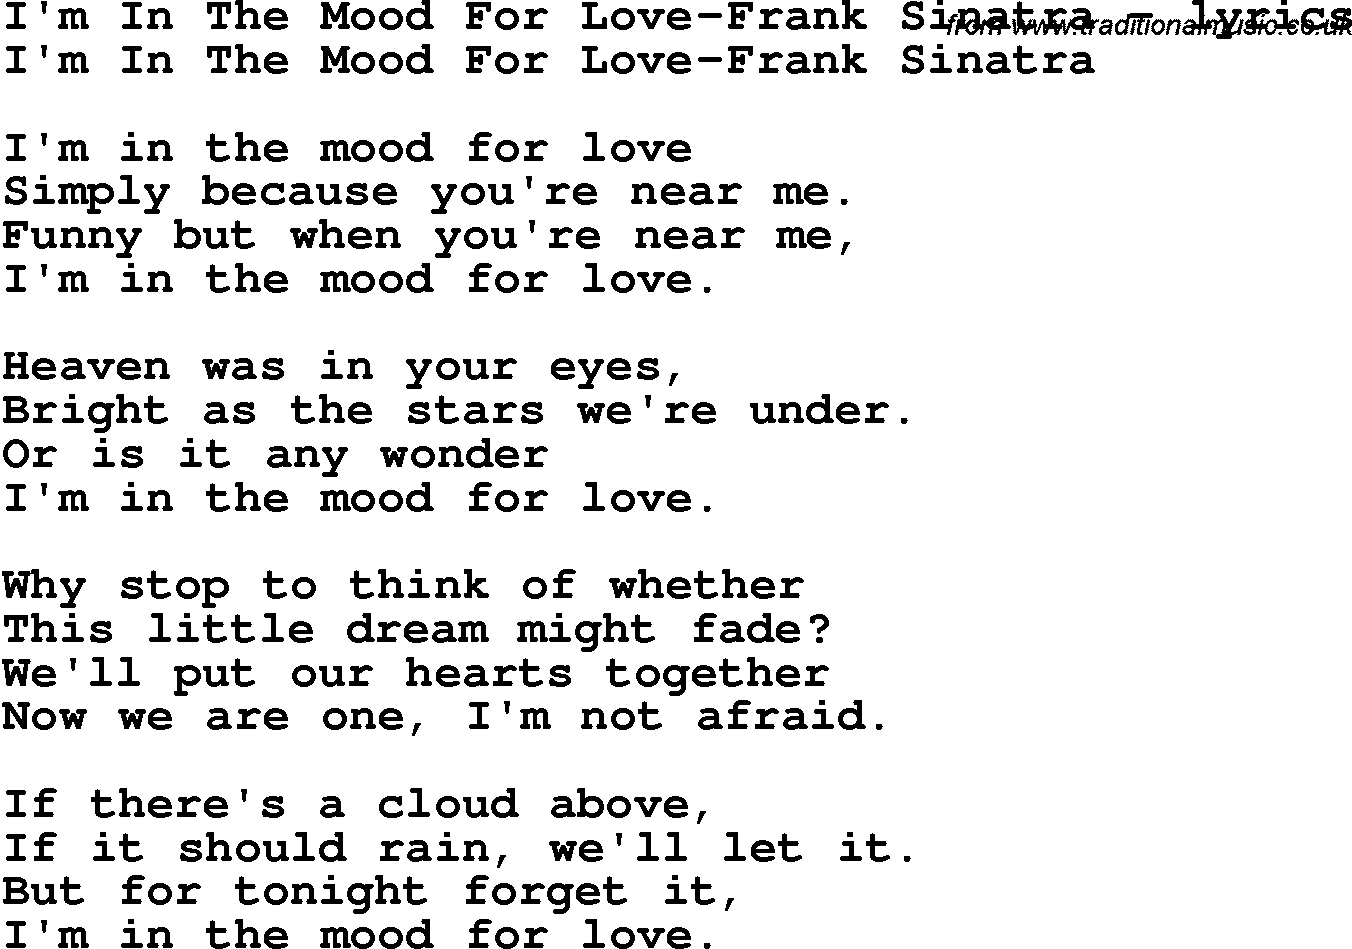 Love Song Lyrics for: I'm In The Mood For Love-Frank Sinatra